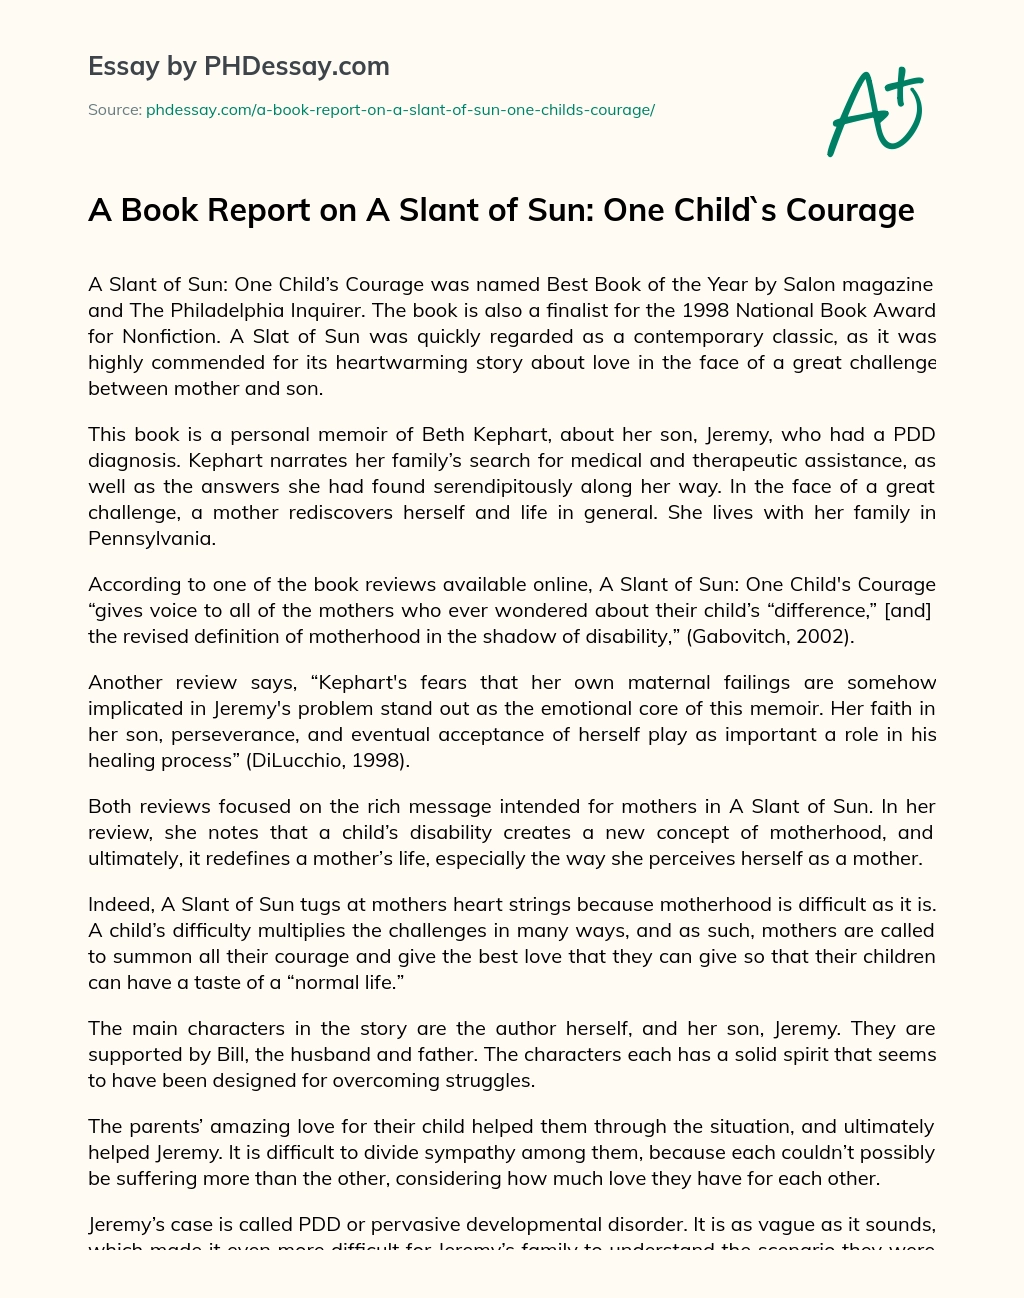 A Book Report on A Slant of Sun: One Child`s Courage essay